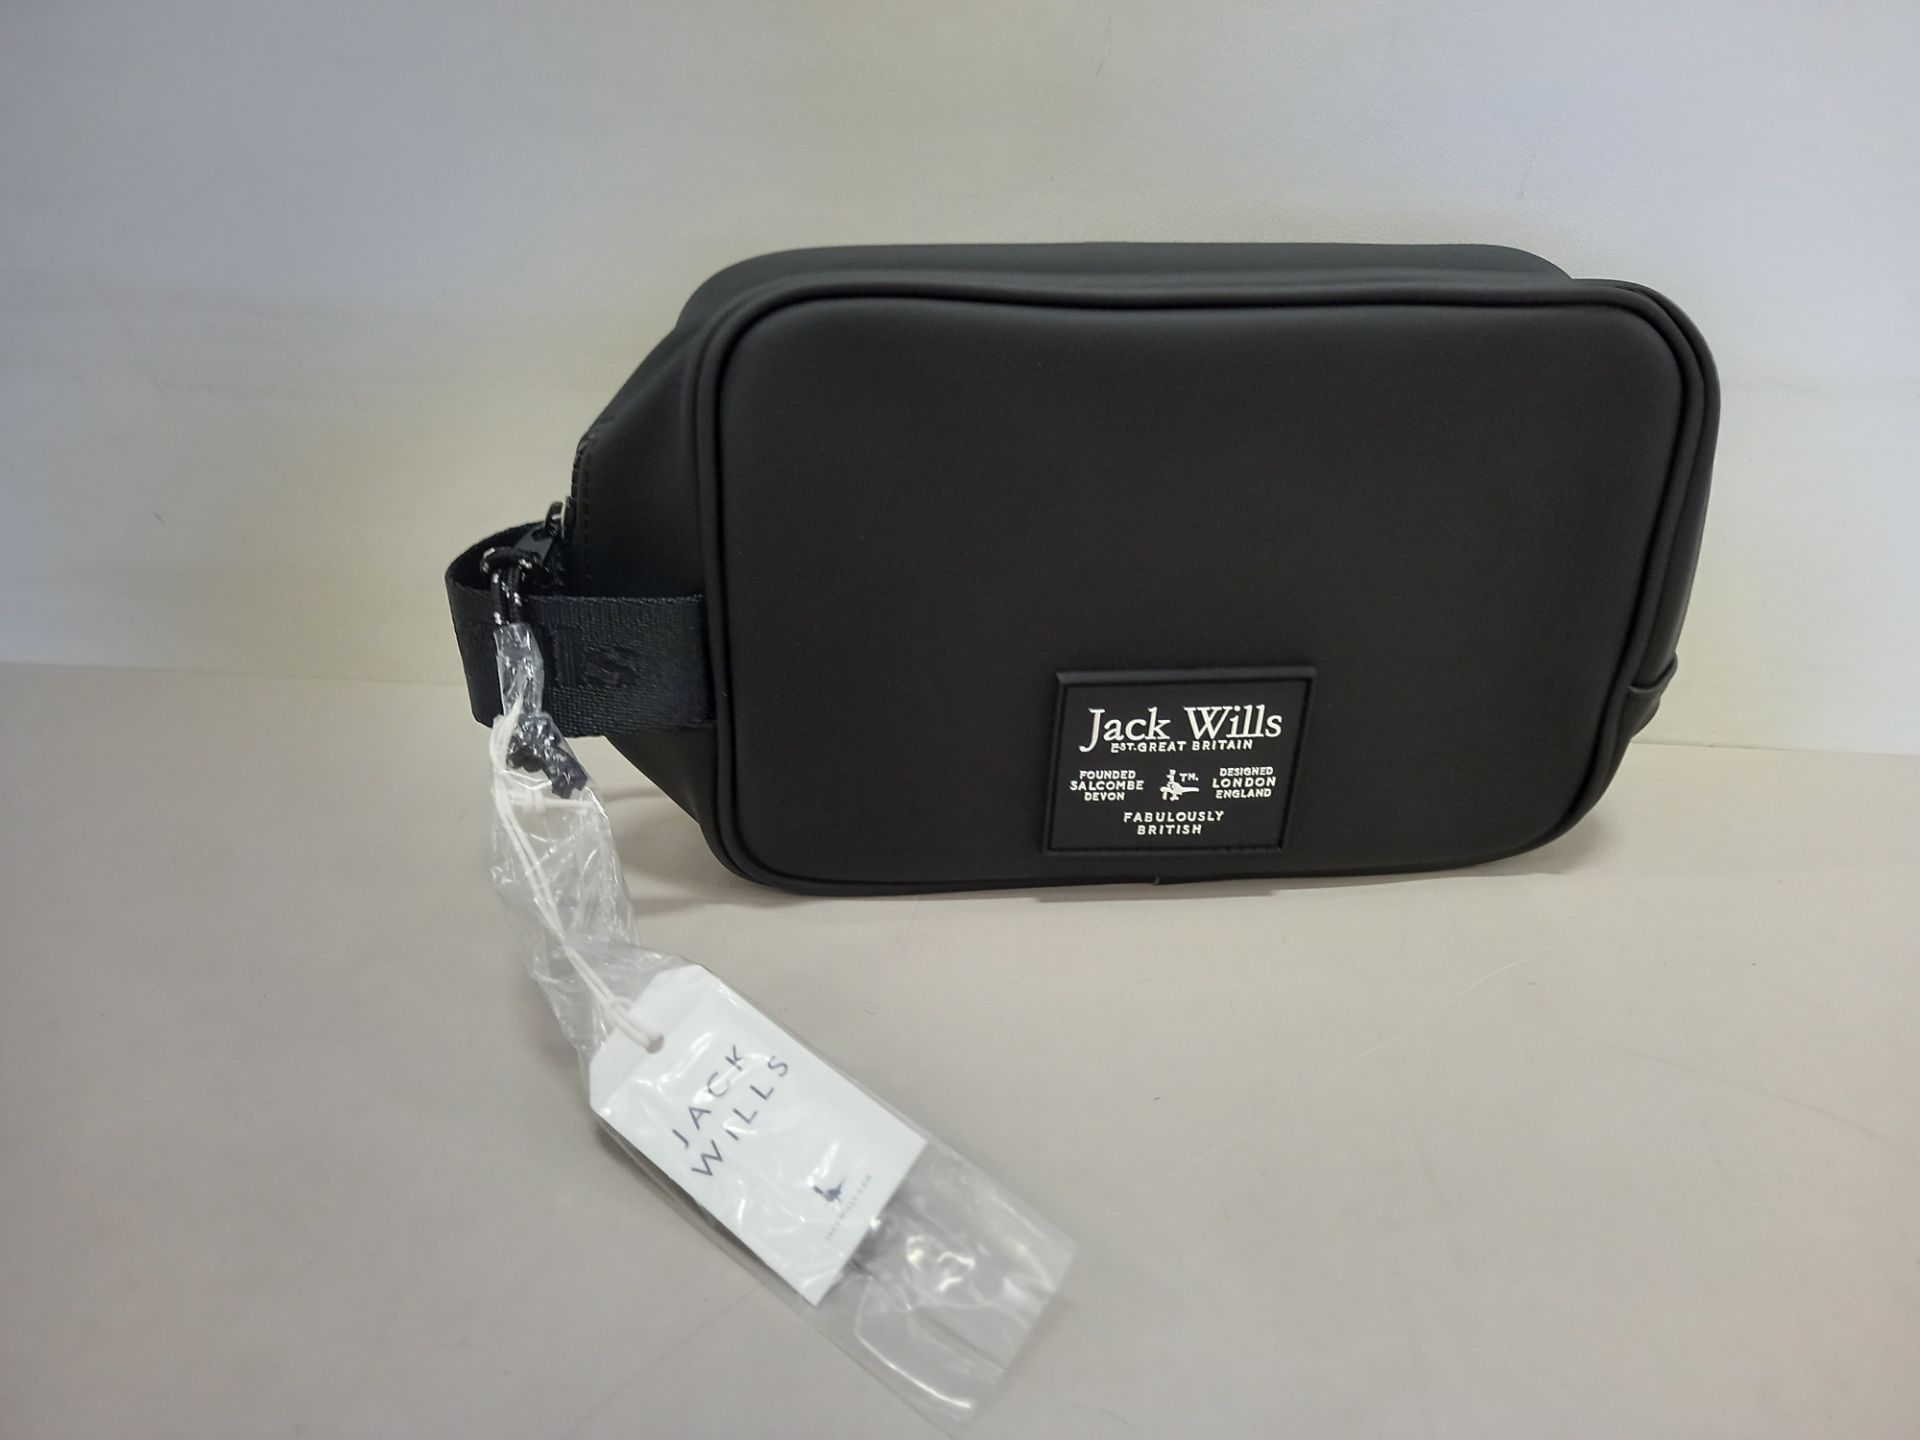 16 X BRAND NEW JACK WILLS LOUGHTON RUBBERISED WASHBAGS IN BLACK WITH SWING TICKETS RRP £24.95 EACH